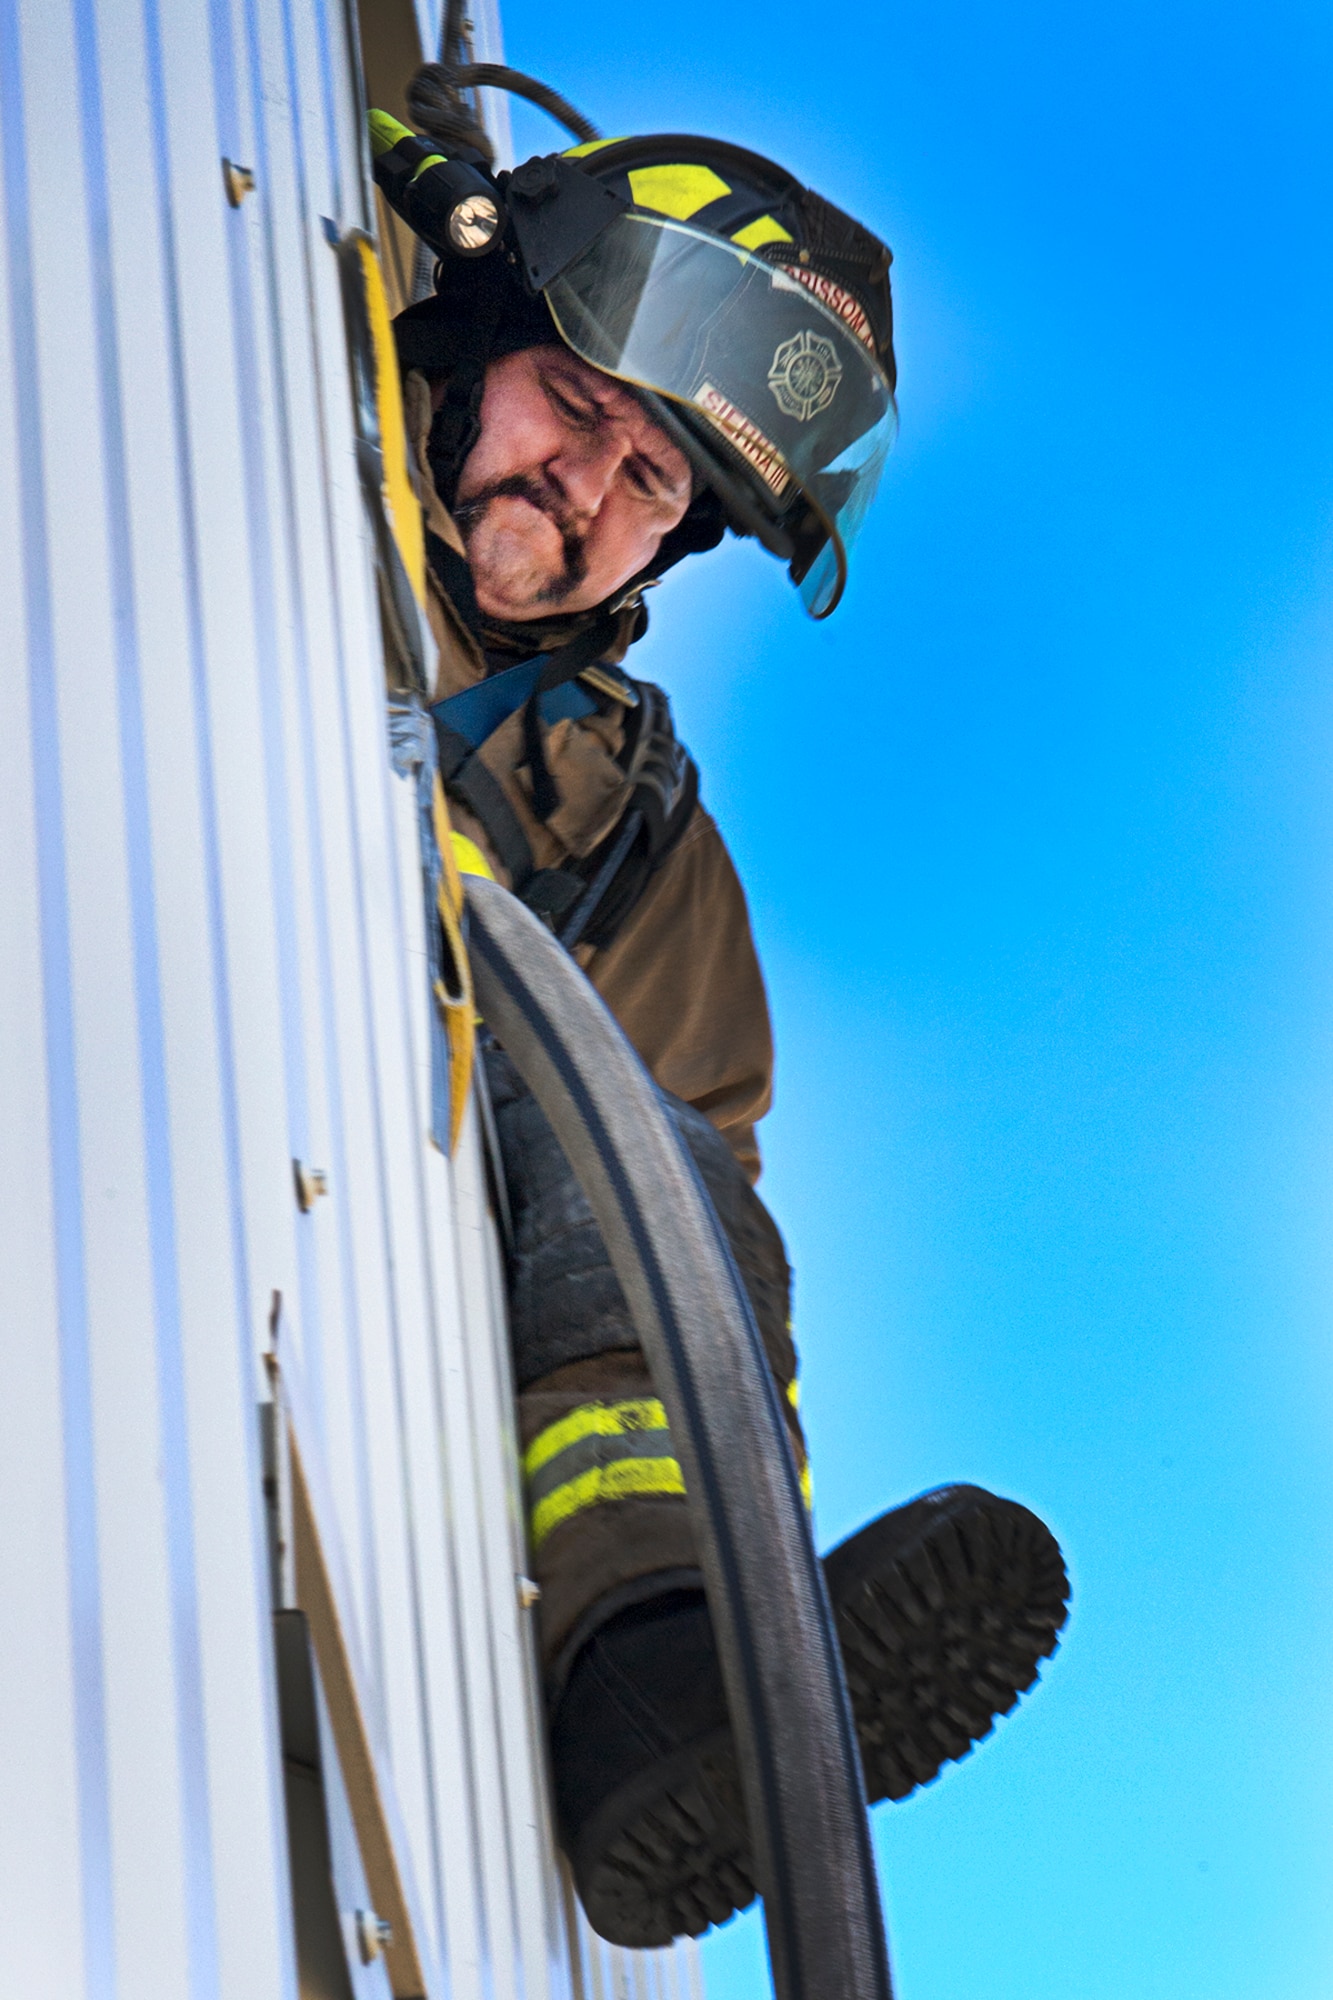 Francisco Sierra III, a firefighter with the Grissom Fire Department, egresses from a second-story window using a fire hose to escape a ‘burning structure’ during training here May 11, 2021. Firefighters from six different departments trained here May 10-14. (Air Force photo by Douglas Hays)